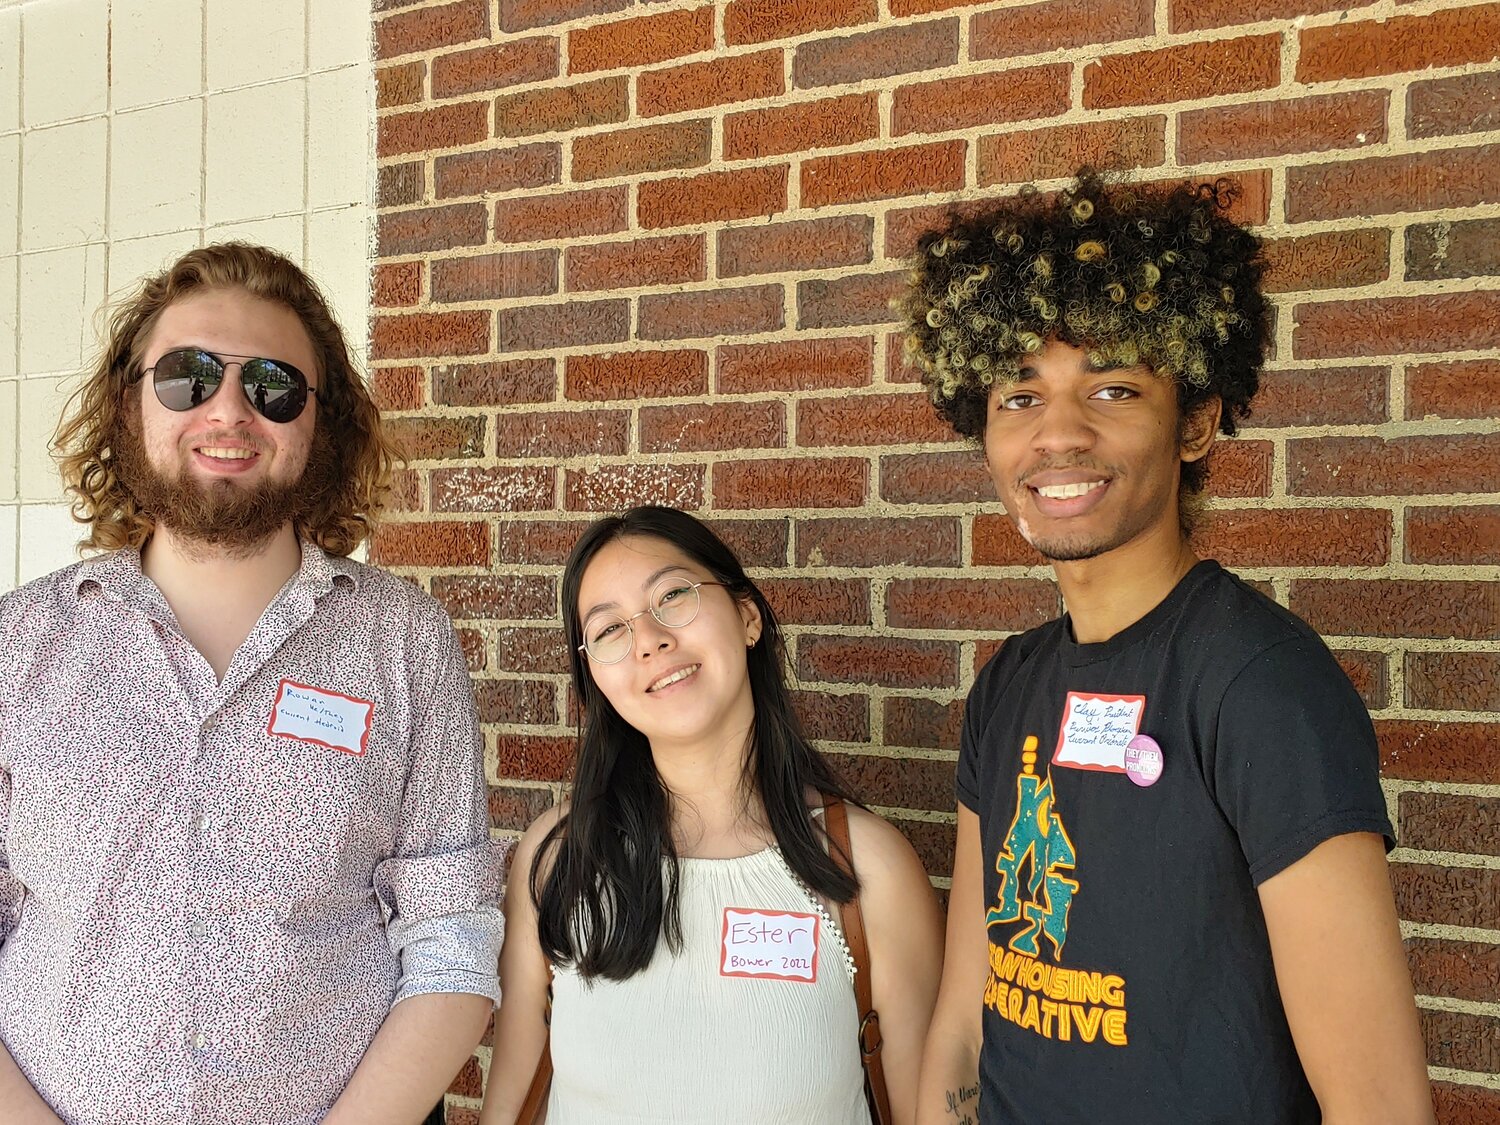 The 50th-year reunion of the Spartan Housing Cooperative attracted some 40 people to Potter Park in Lansing on Saturday, including (from left) current “co-operators” Rowan Price, Ester Lee and Clay Griffith, who is this year’s president. 